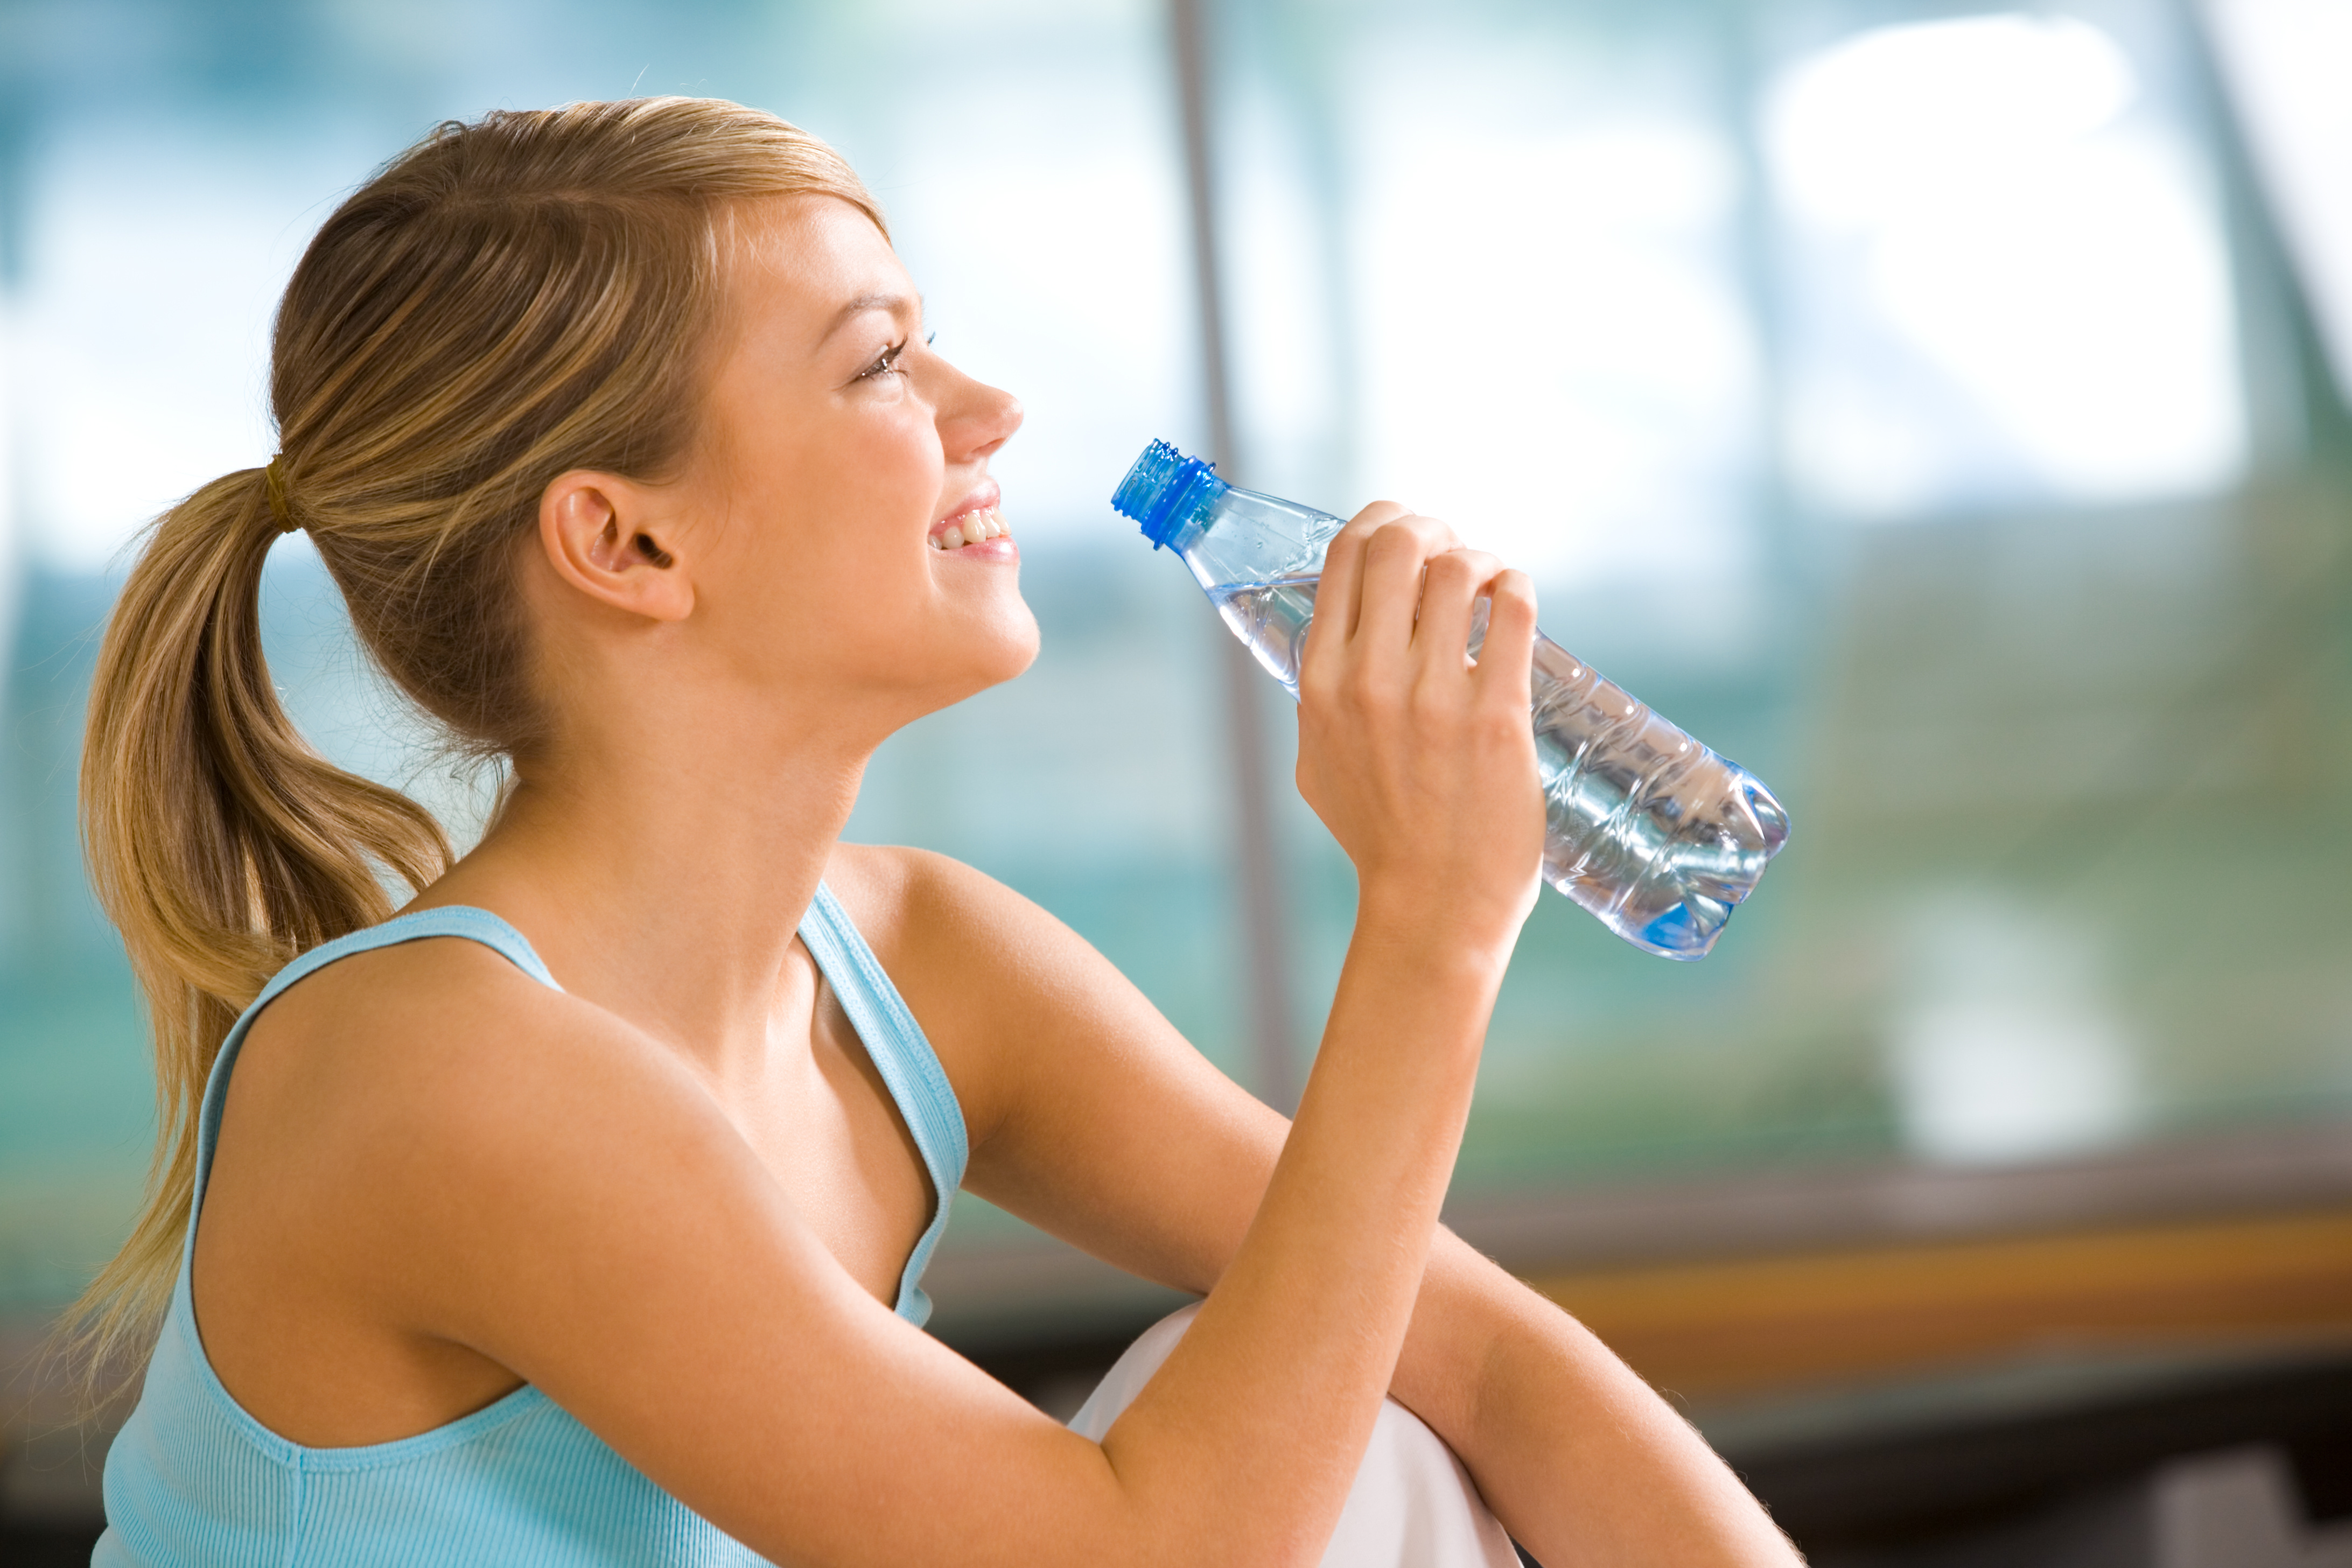 Woman staying hydrated by drinking water from a bottle.